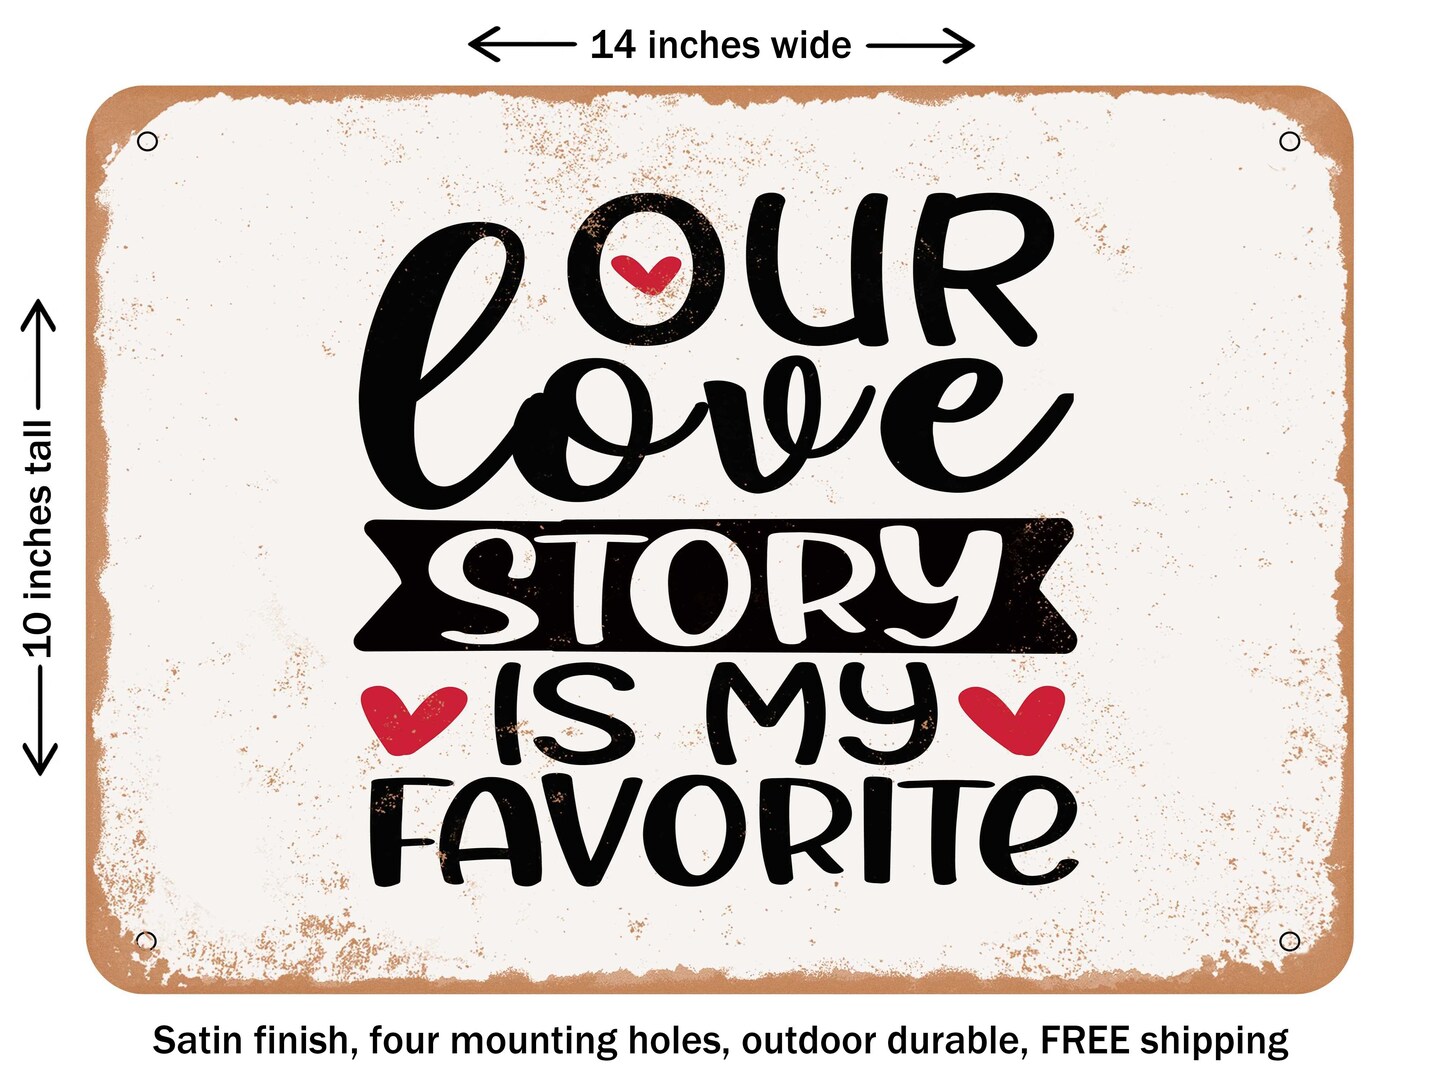 DECORATIVE METAL SIGN - Our Love Story is My Favorite - 2 - Vintage Rusty Look